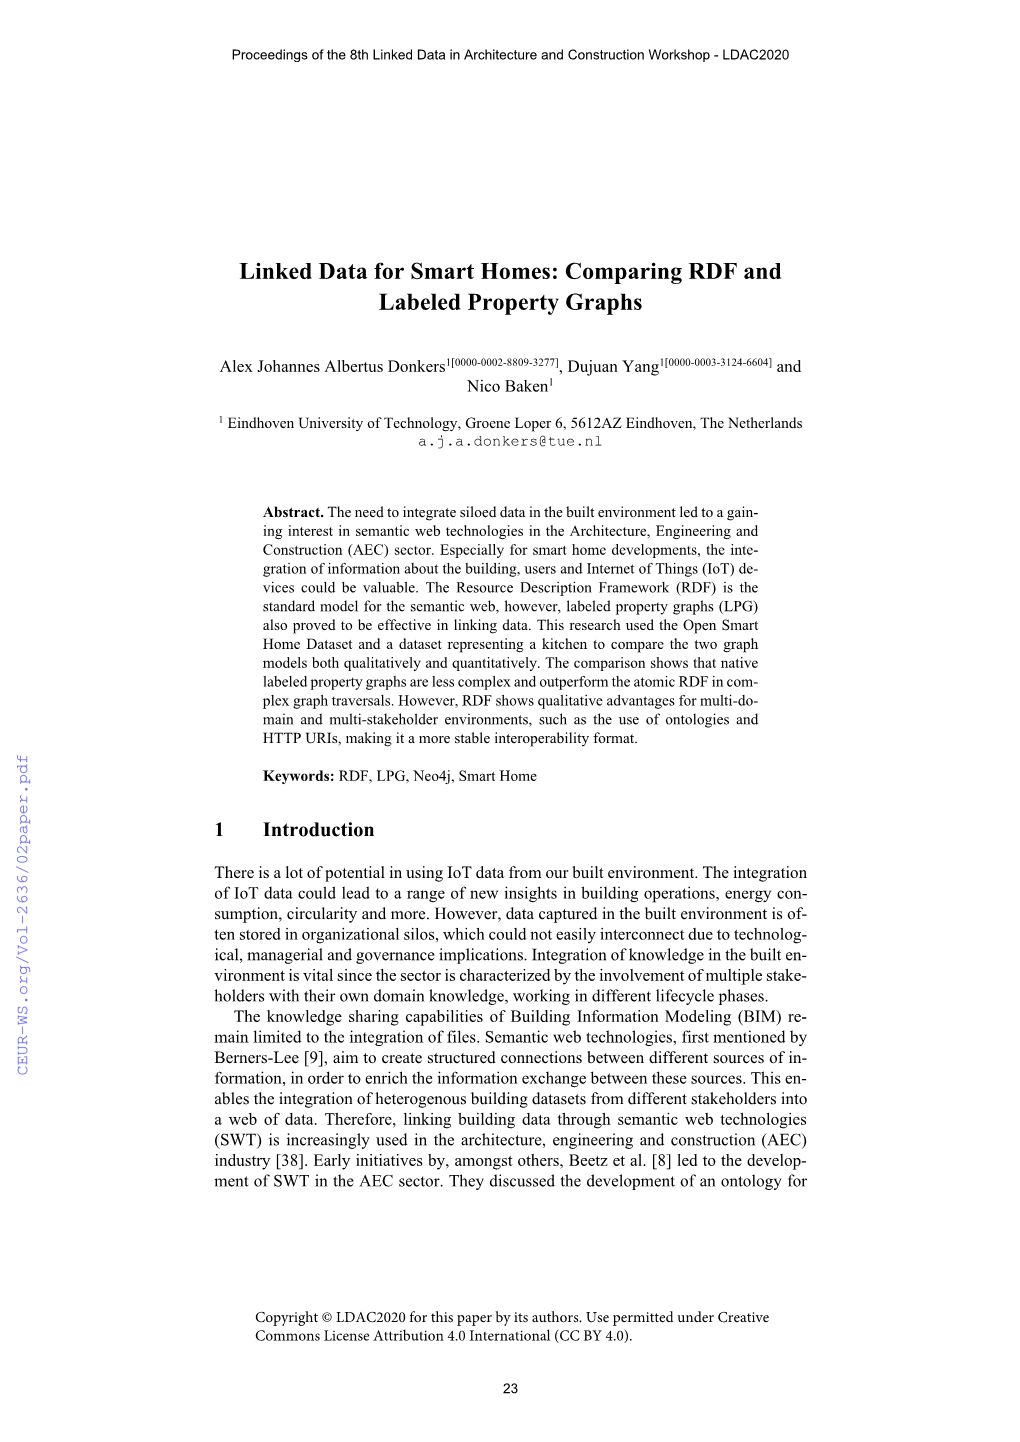 Linked Data for Smart Homes: Comparing RDF and Labeled Property Graphs